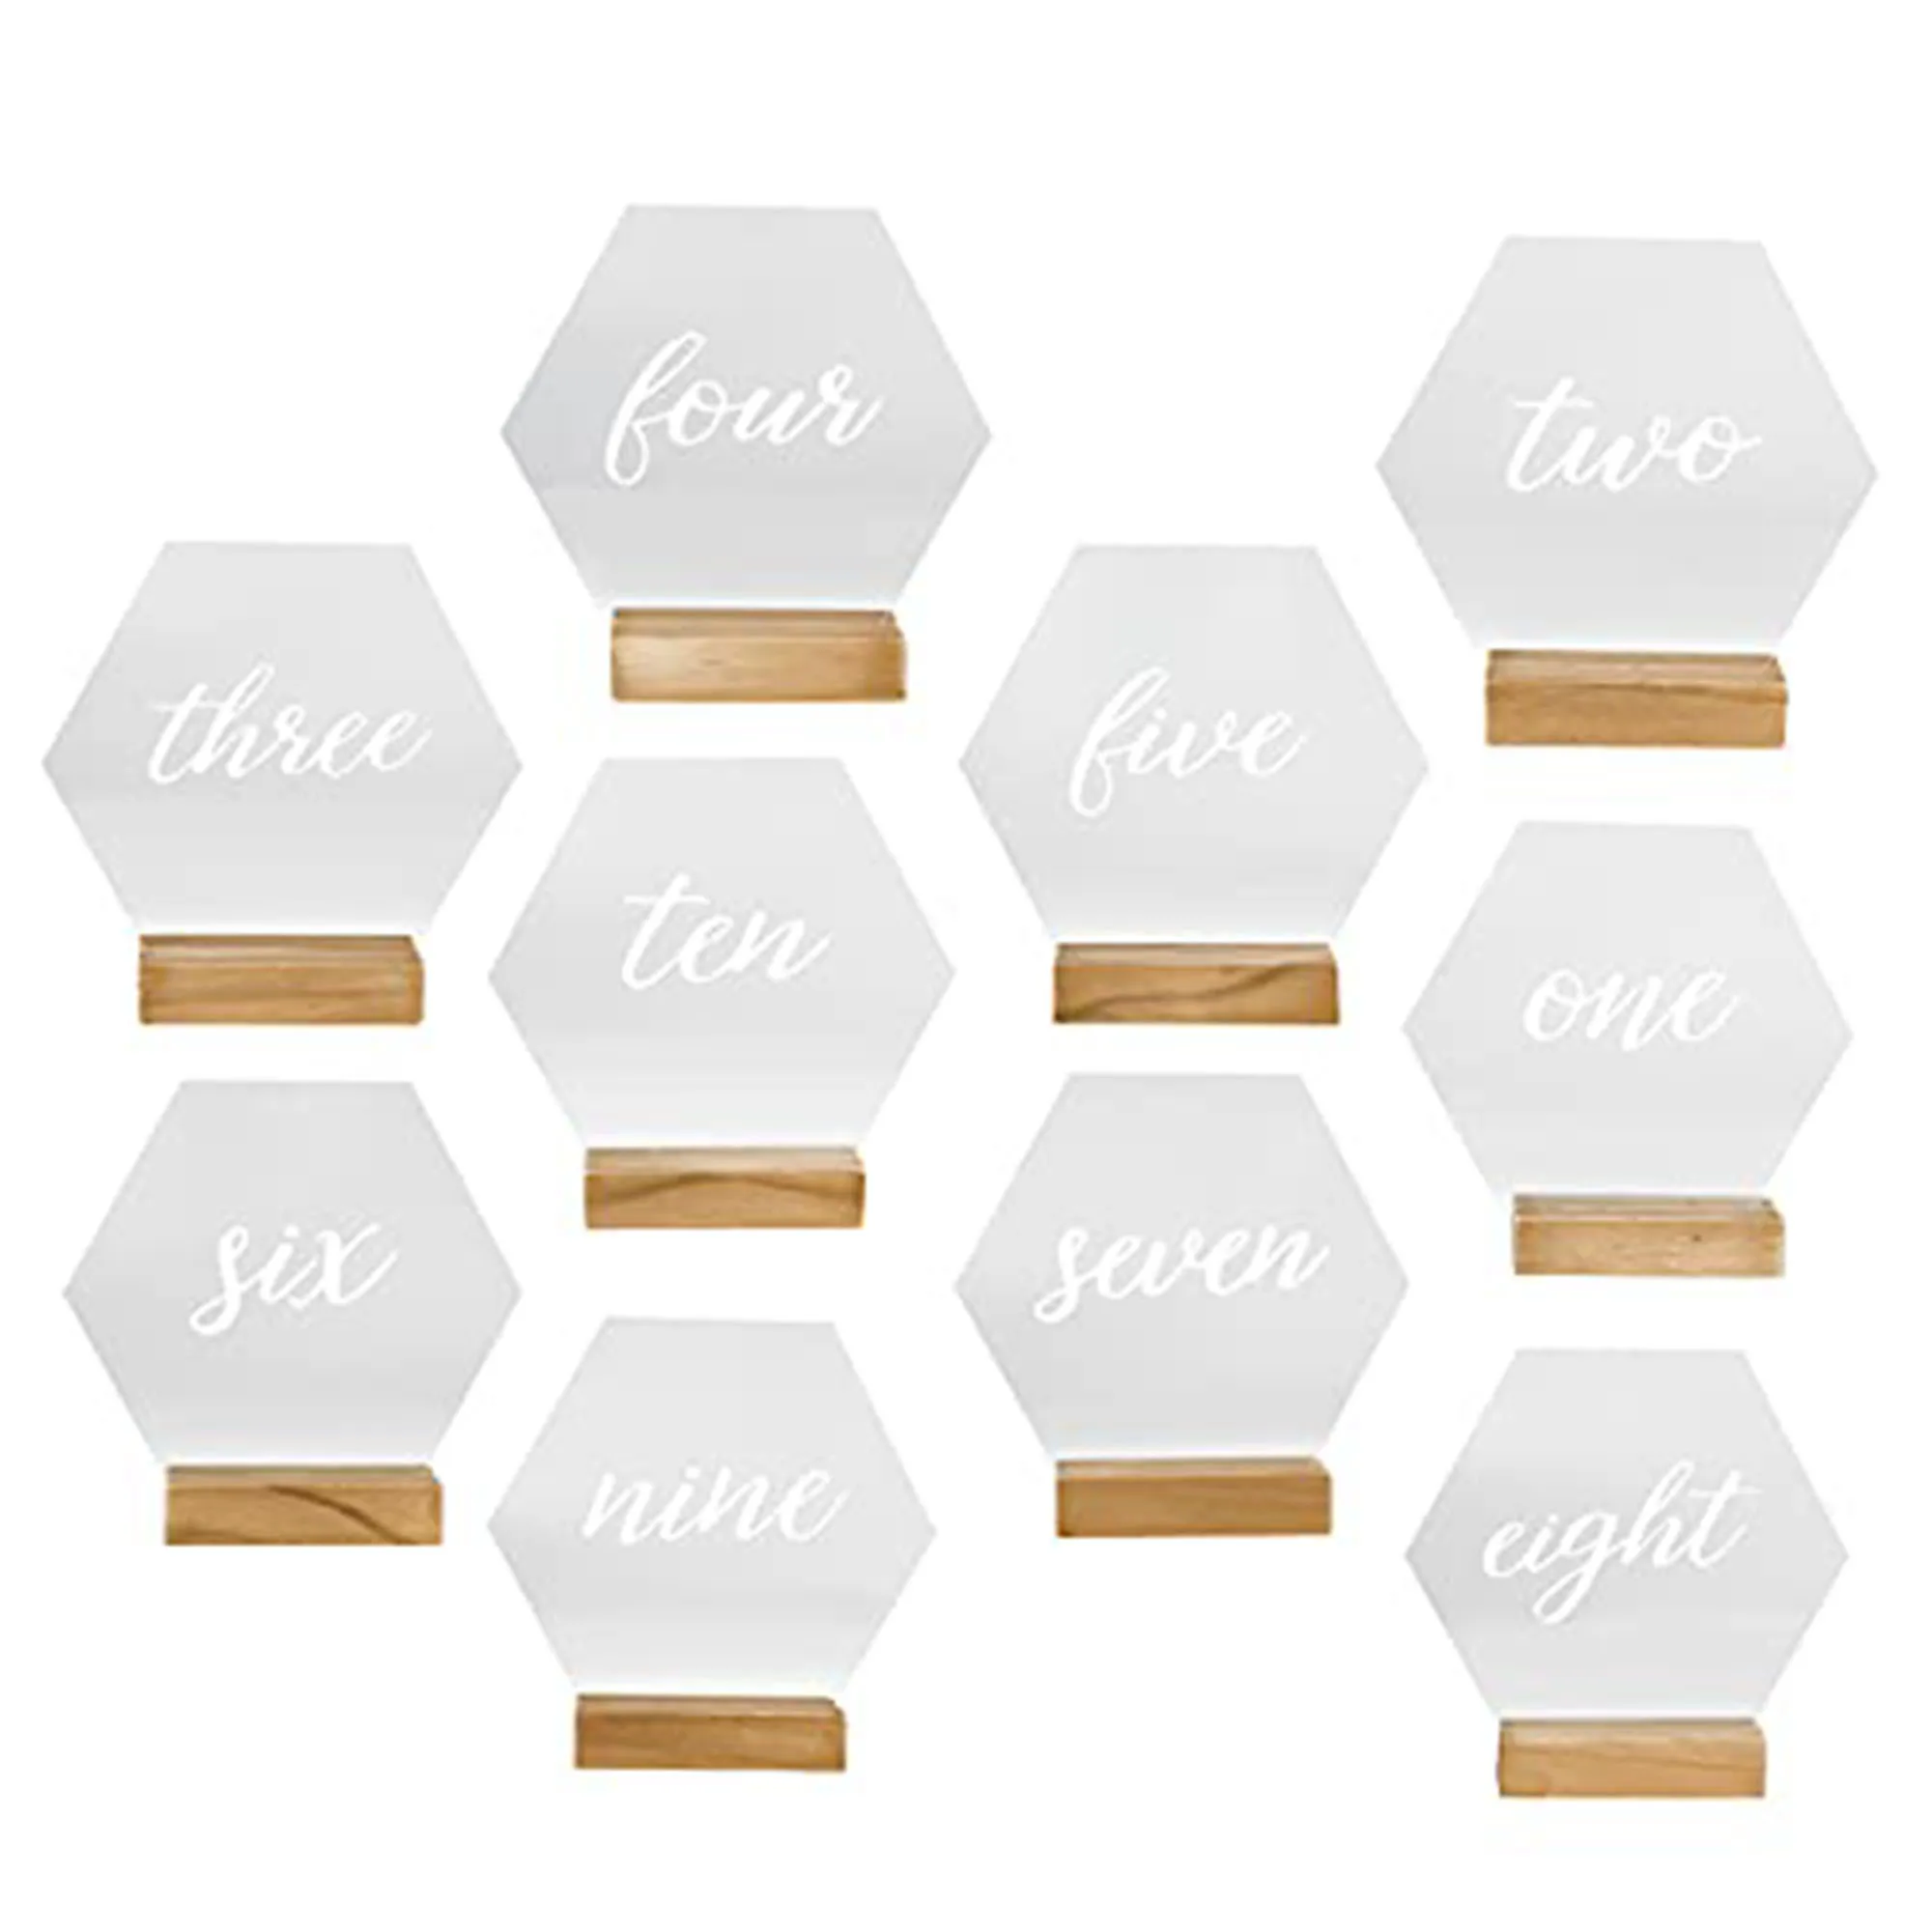 

New Acrylic Geometry Table Sign Holder Wooden Base Clear Wedding Table Sign Number Place Card Display Stand for Restaurant Hotel